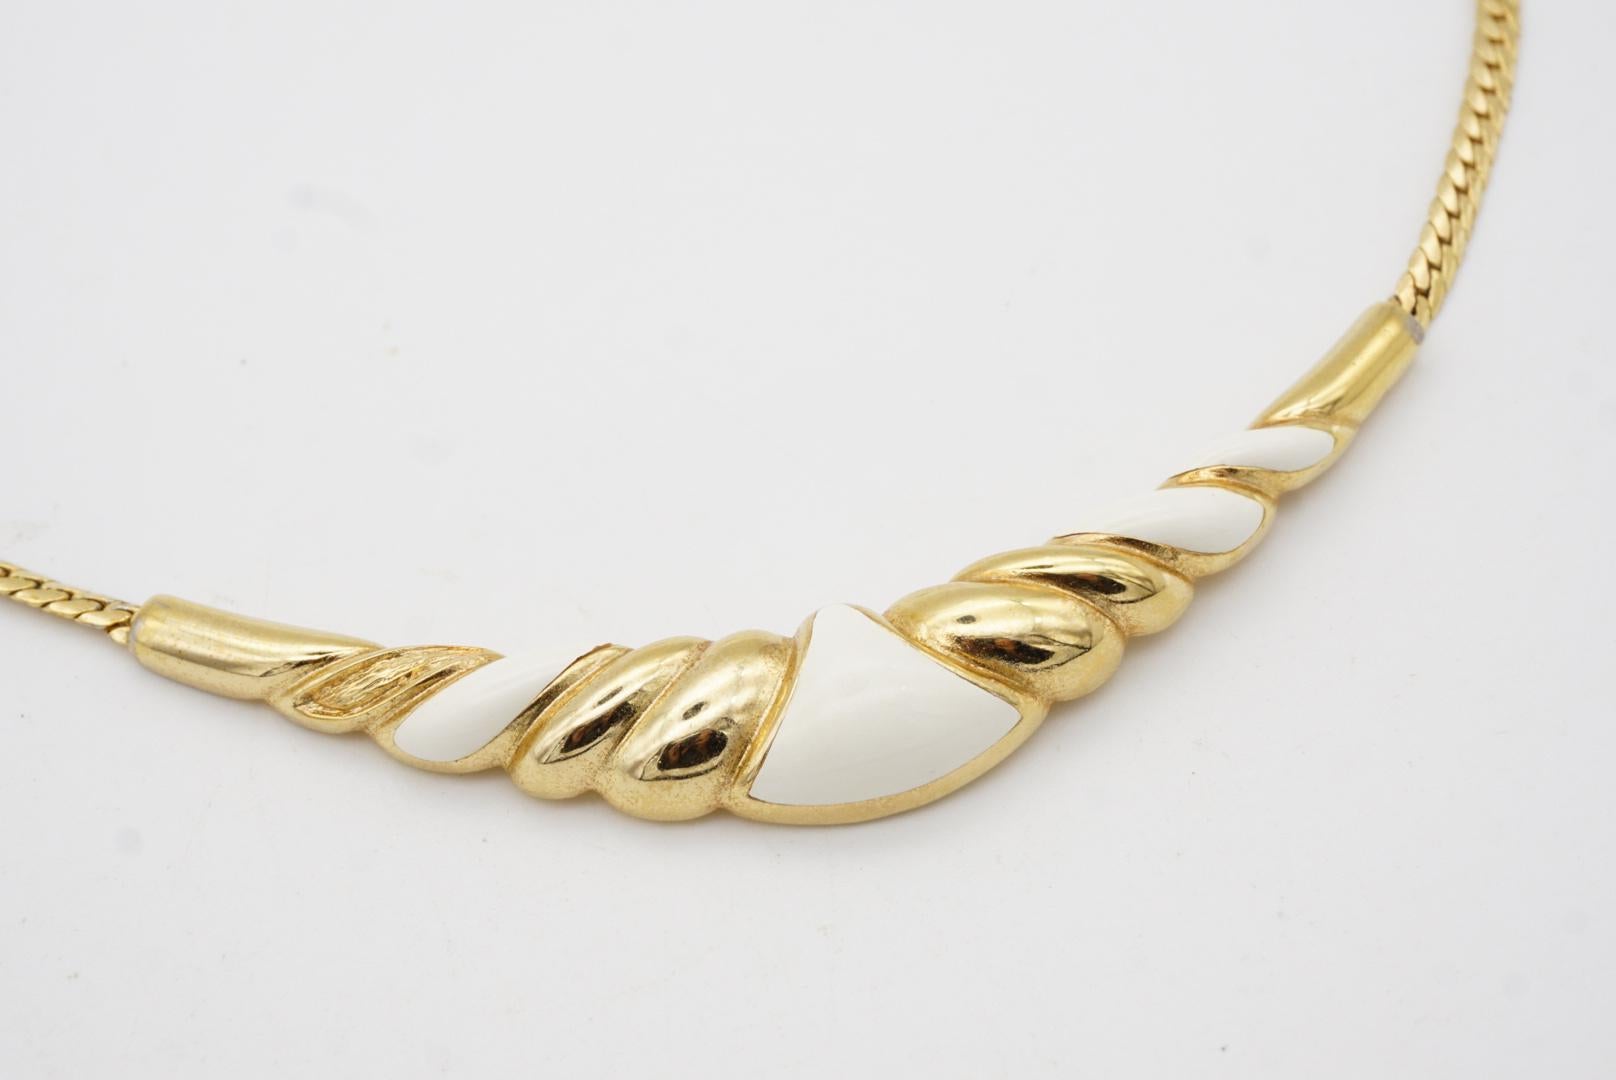 Christian Dior Vintage 1970s White Crescent Moon Triangle Long Pendant Necklace For Sale 3